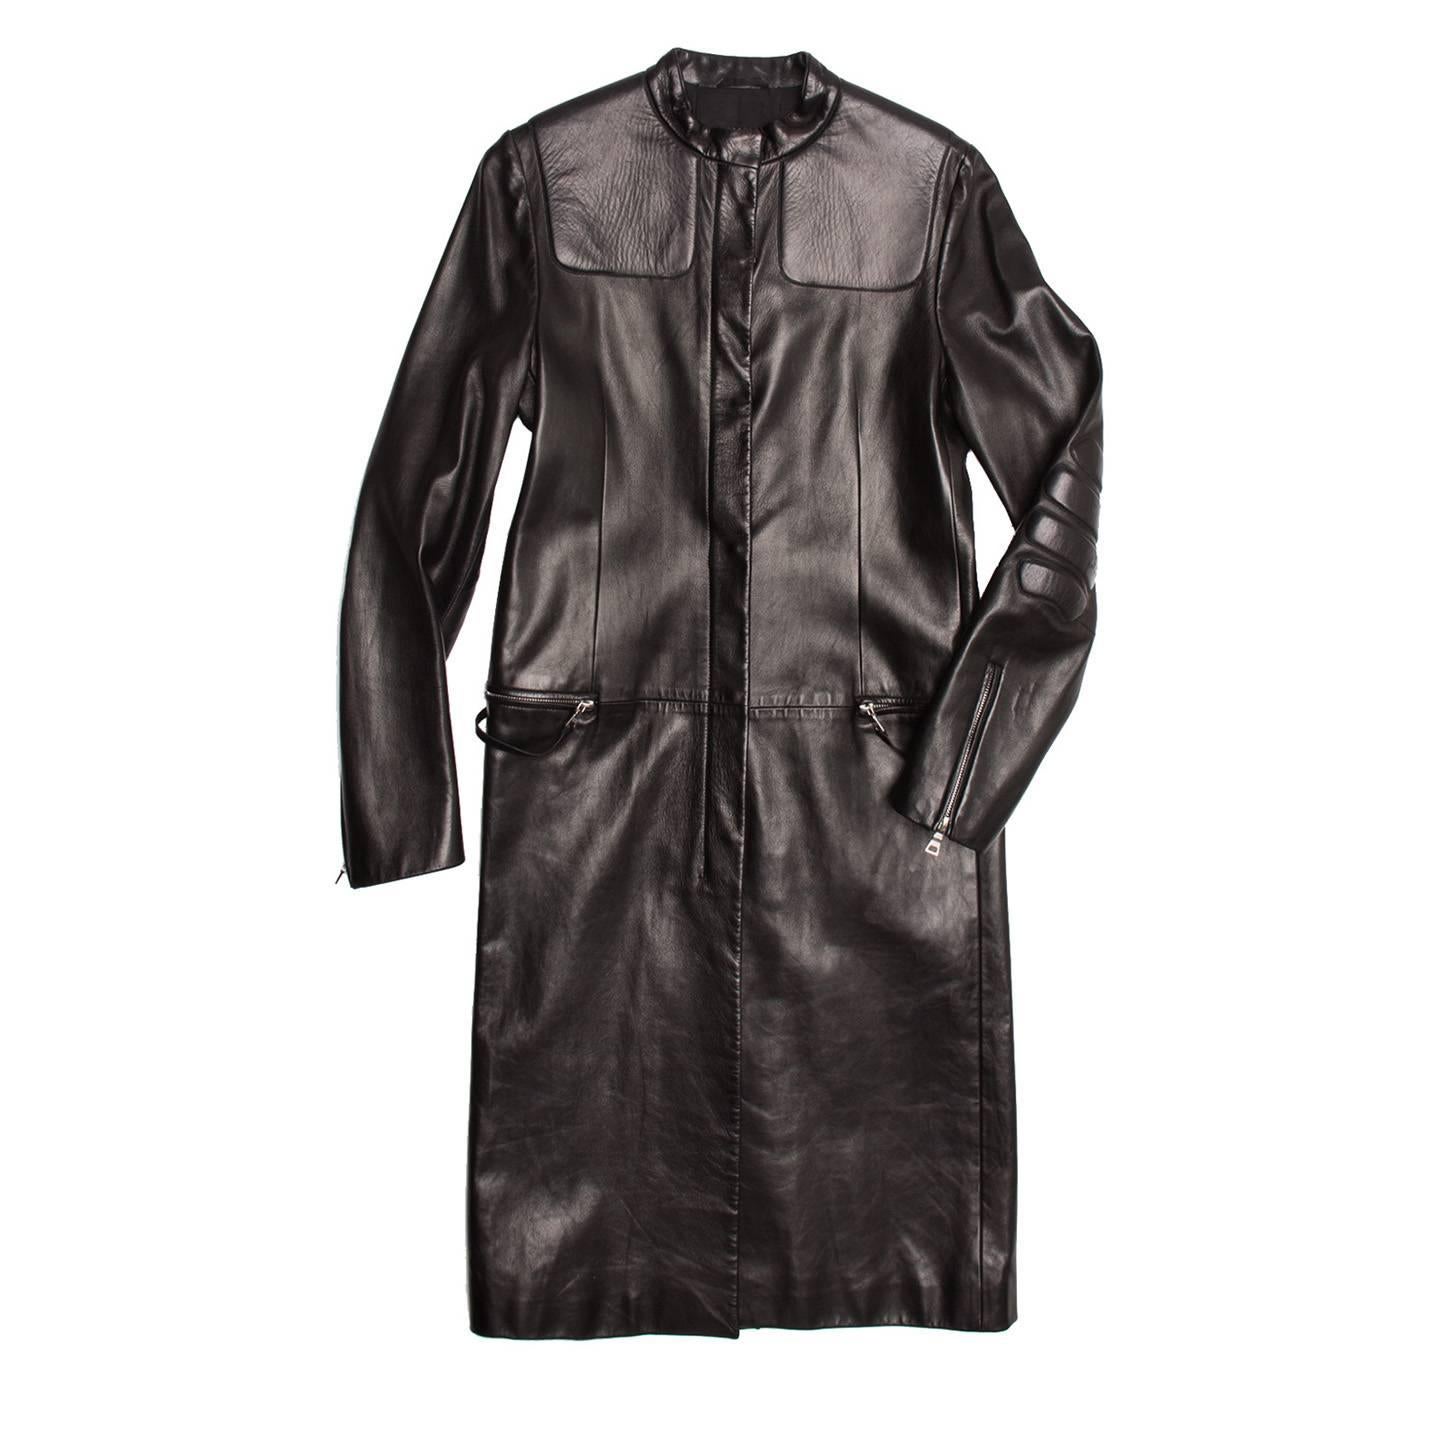 Long black sleek leather moto-racer coat with a futuristic feel. Zippered pockets at waist seam with self leather fixed pulls. Mandarin collar and hidden snaps at front placket. Raised lightly padded detailing at elbow area with zippered back cuffs